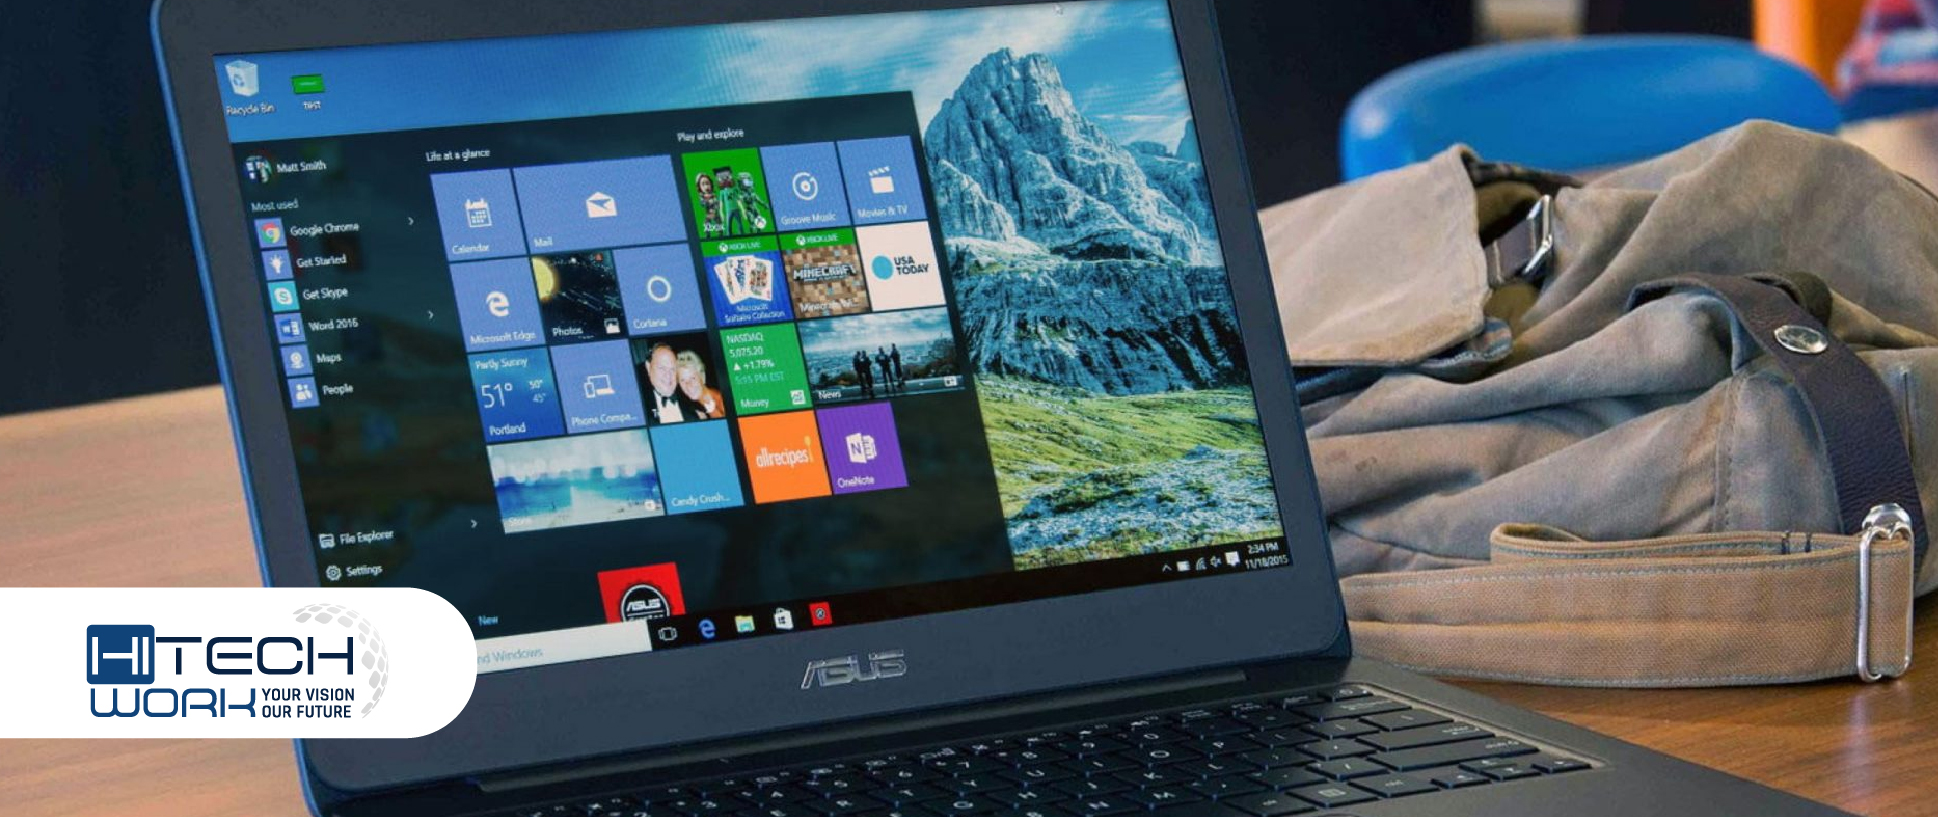 How To Optimize Windows 10 Laptop To Run Computer Faster